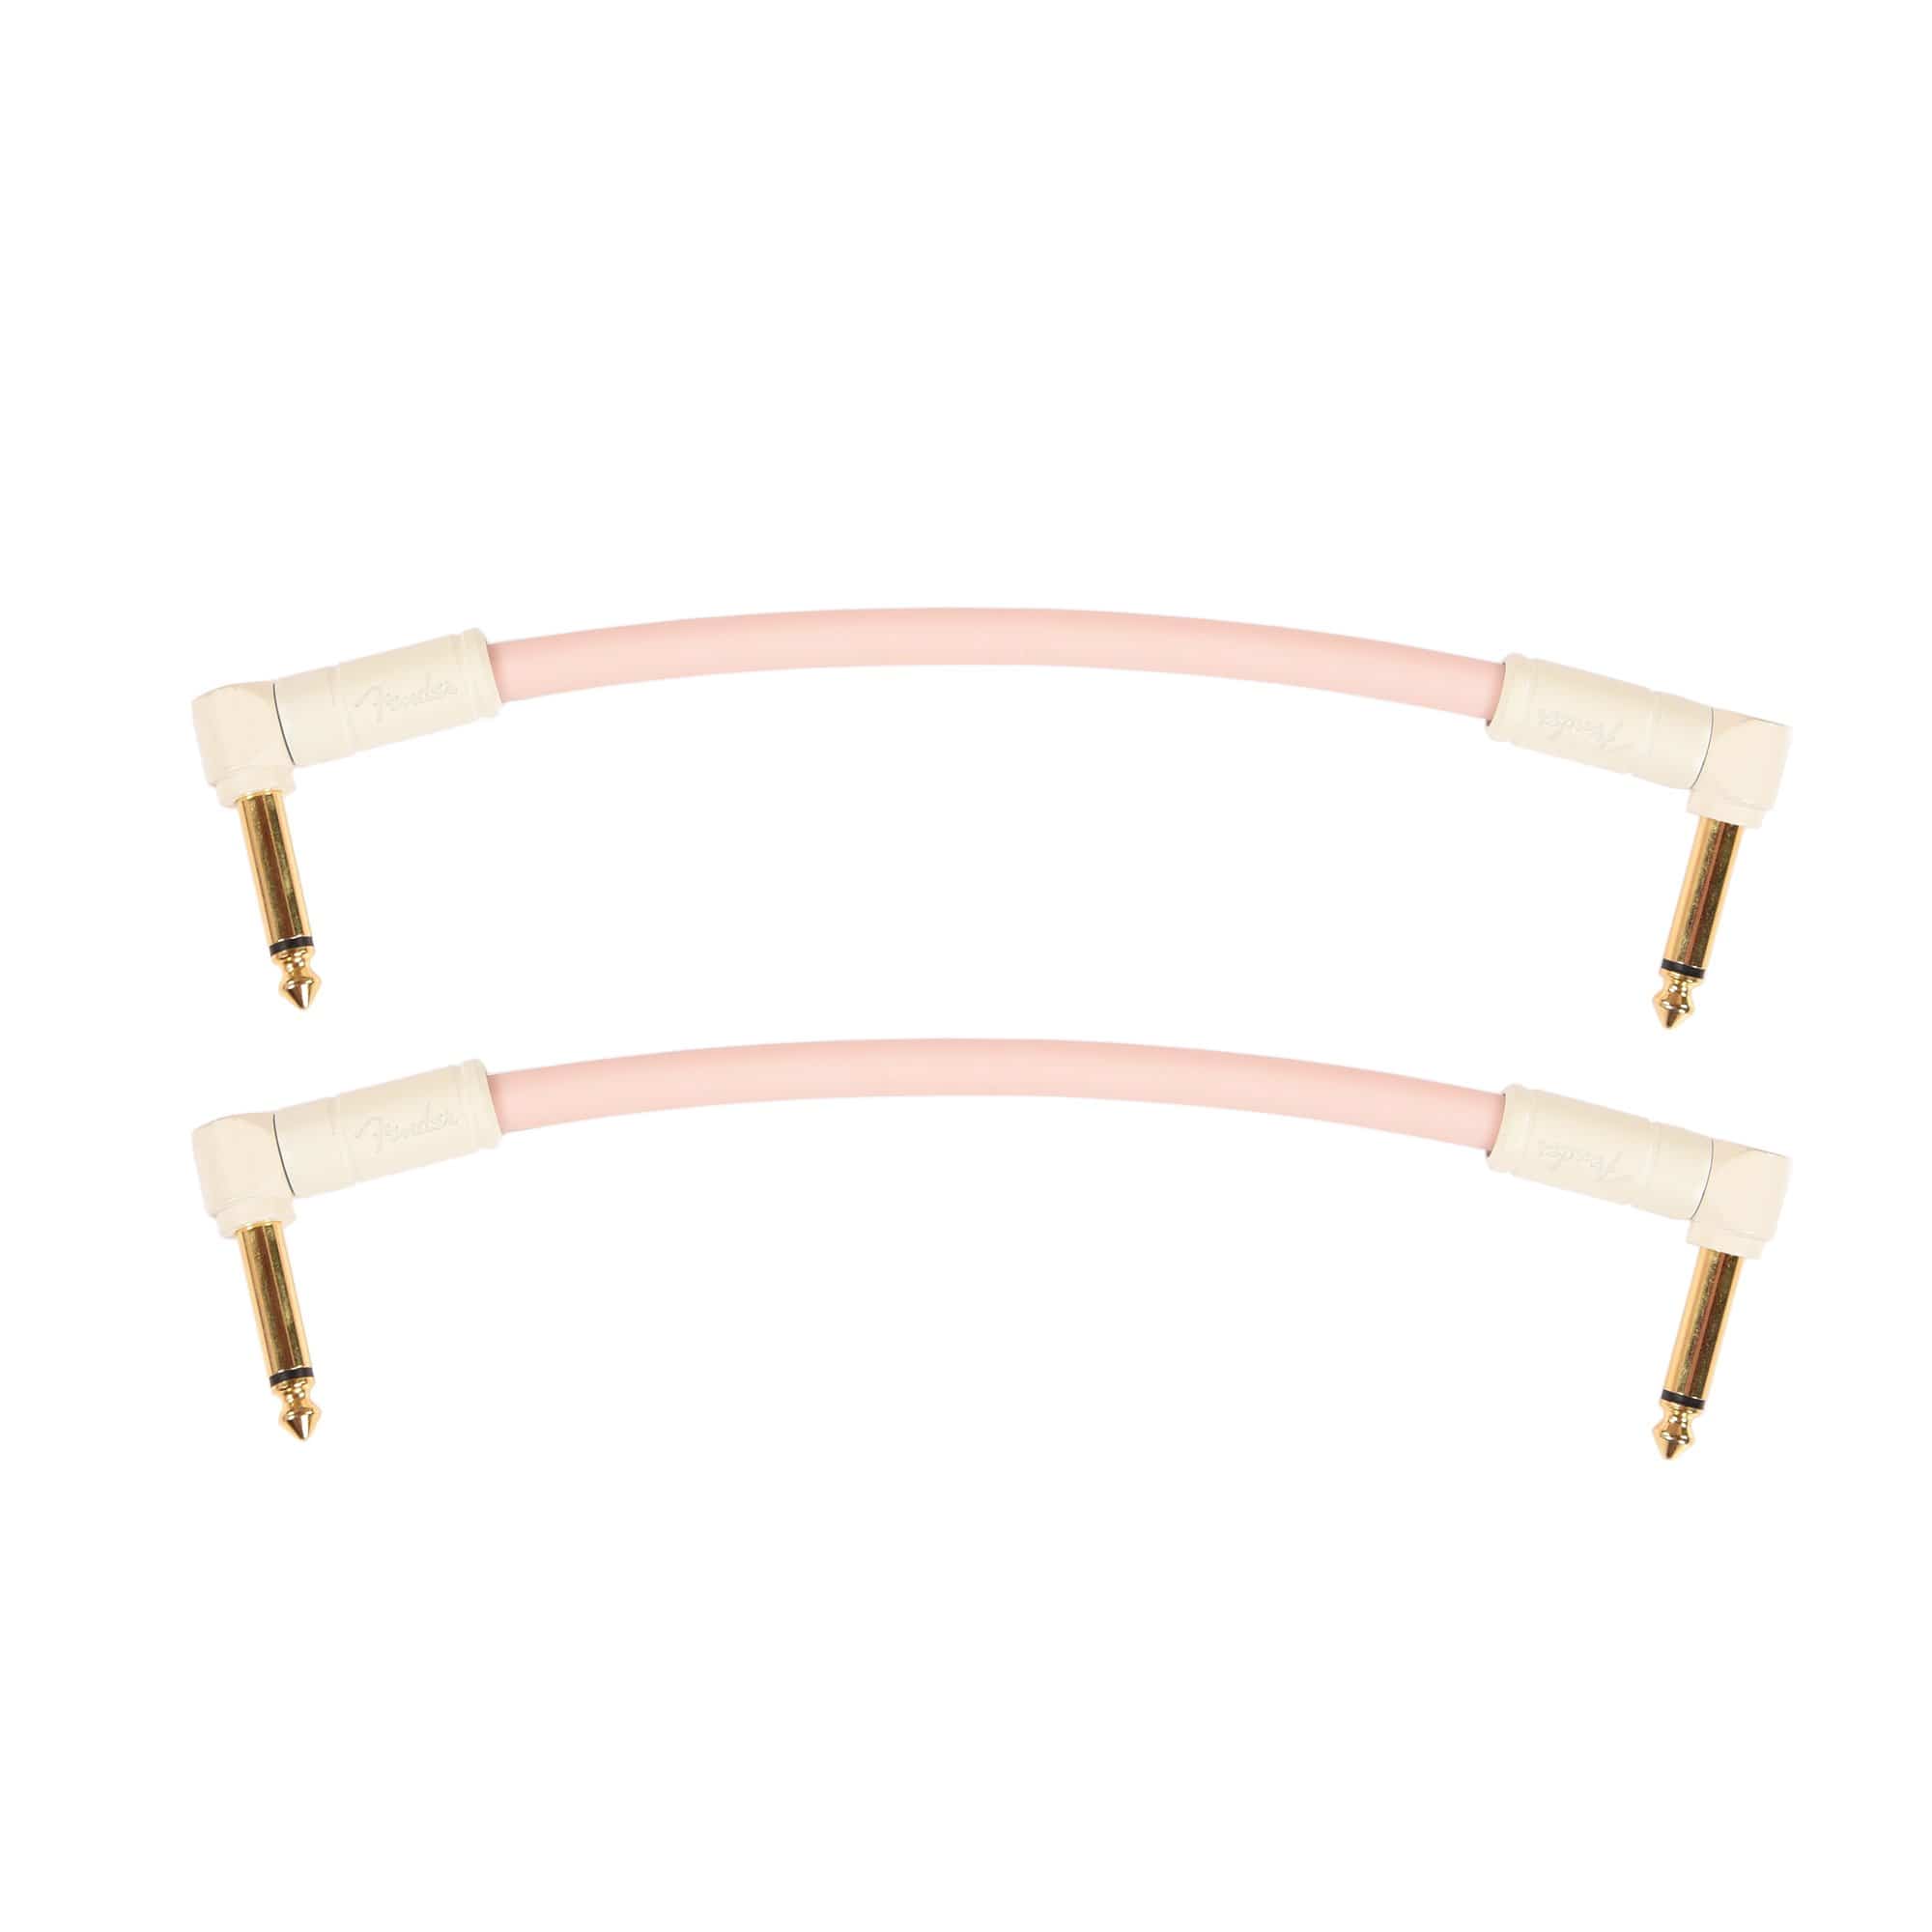 Fender Deluxe Instrument Patch Cable Shell Pink 6